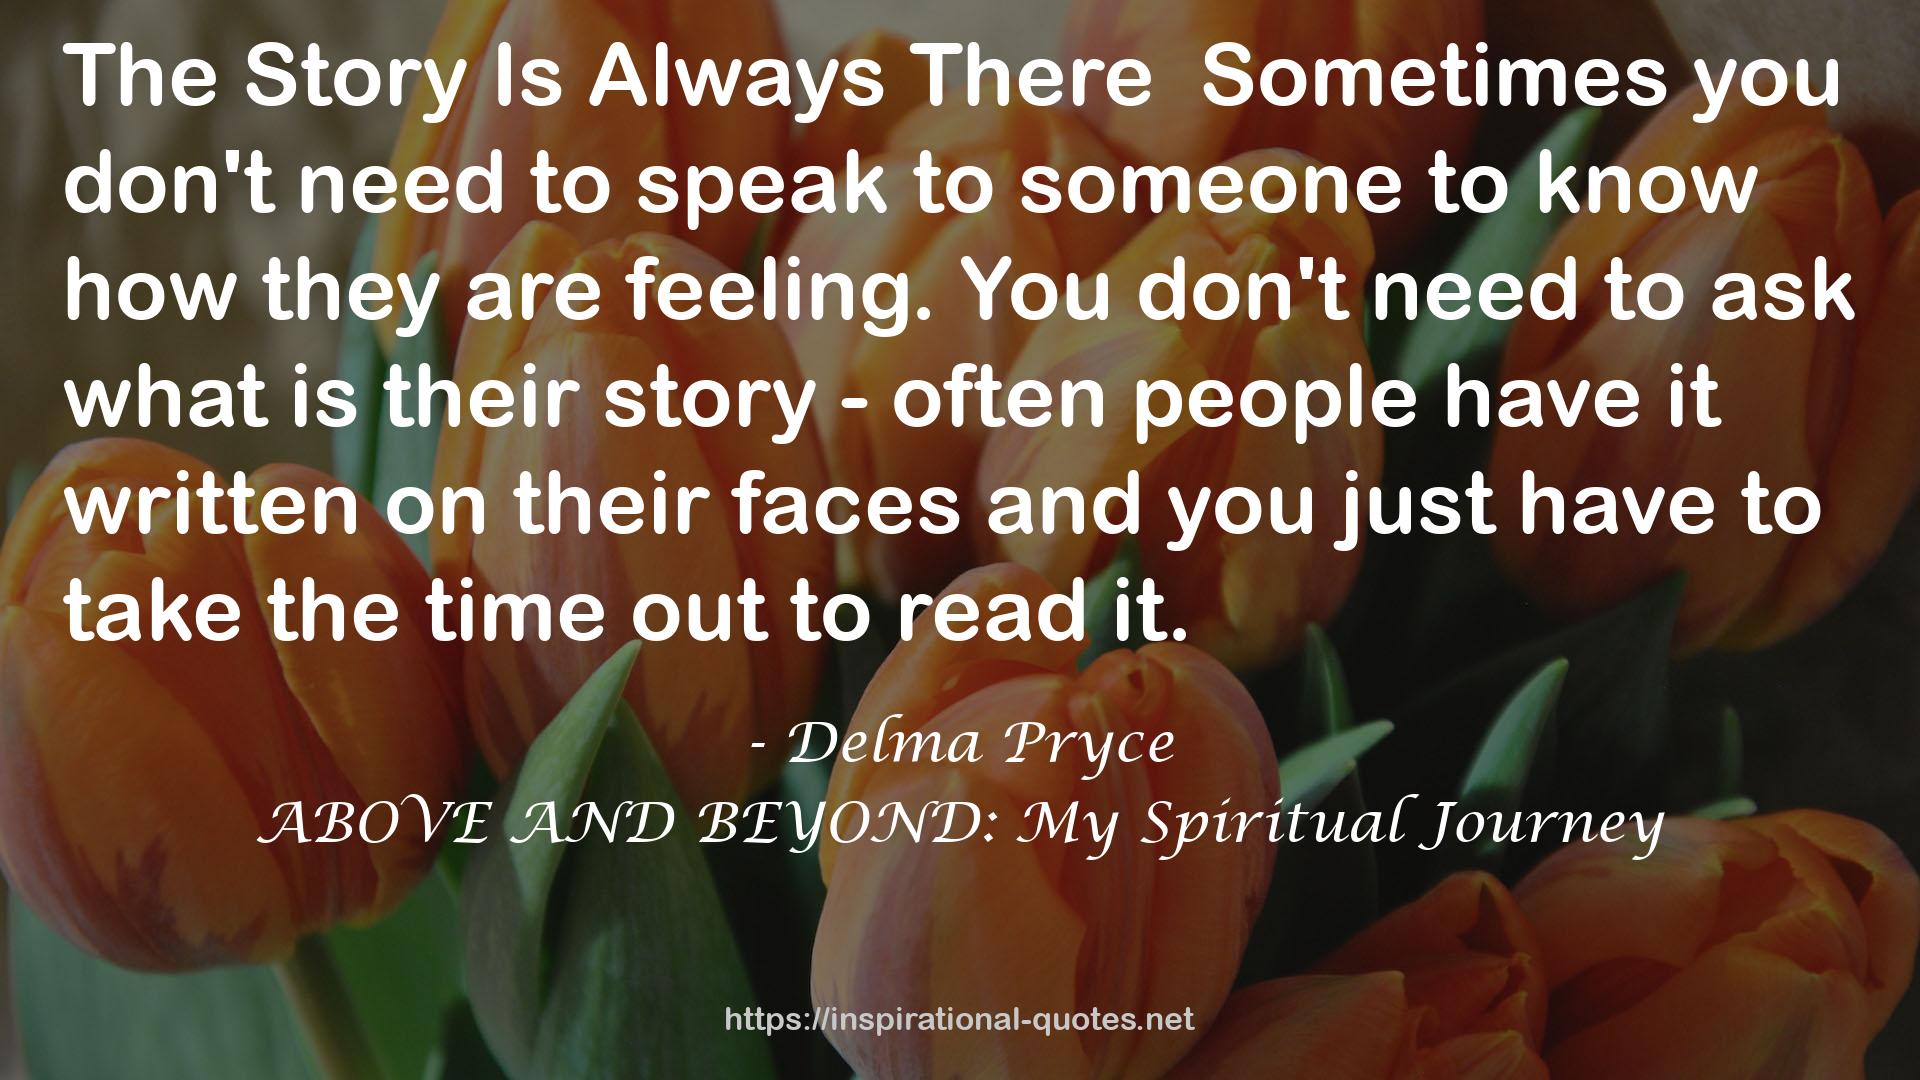 ABOVE AND BEYOND: My Spiritual Journey QUOTES